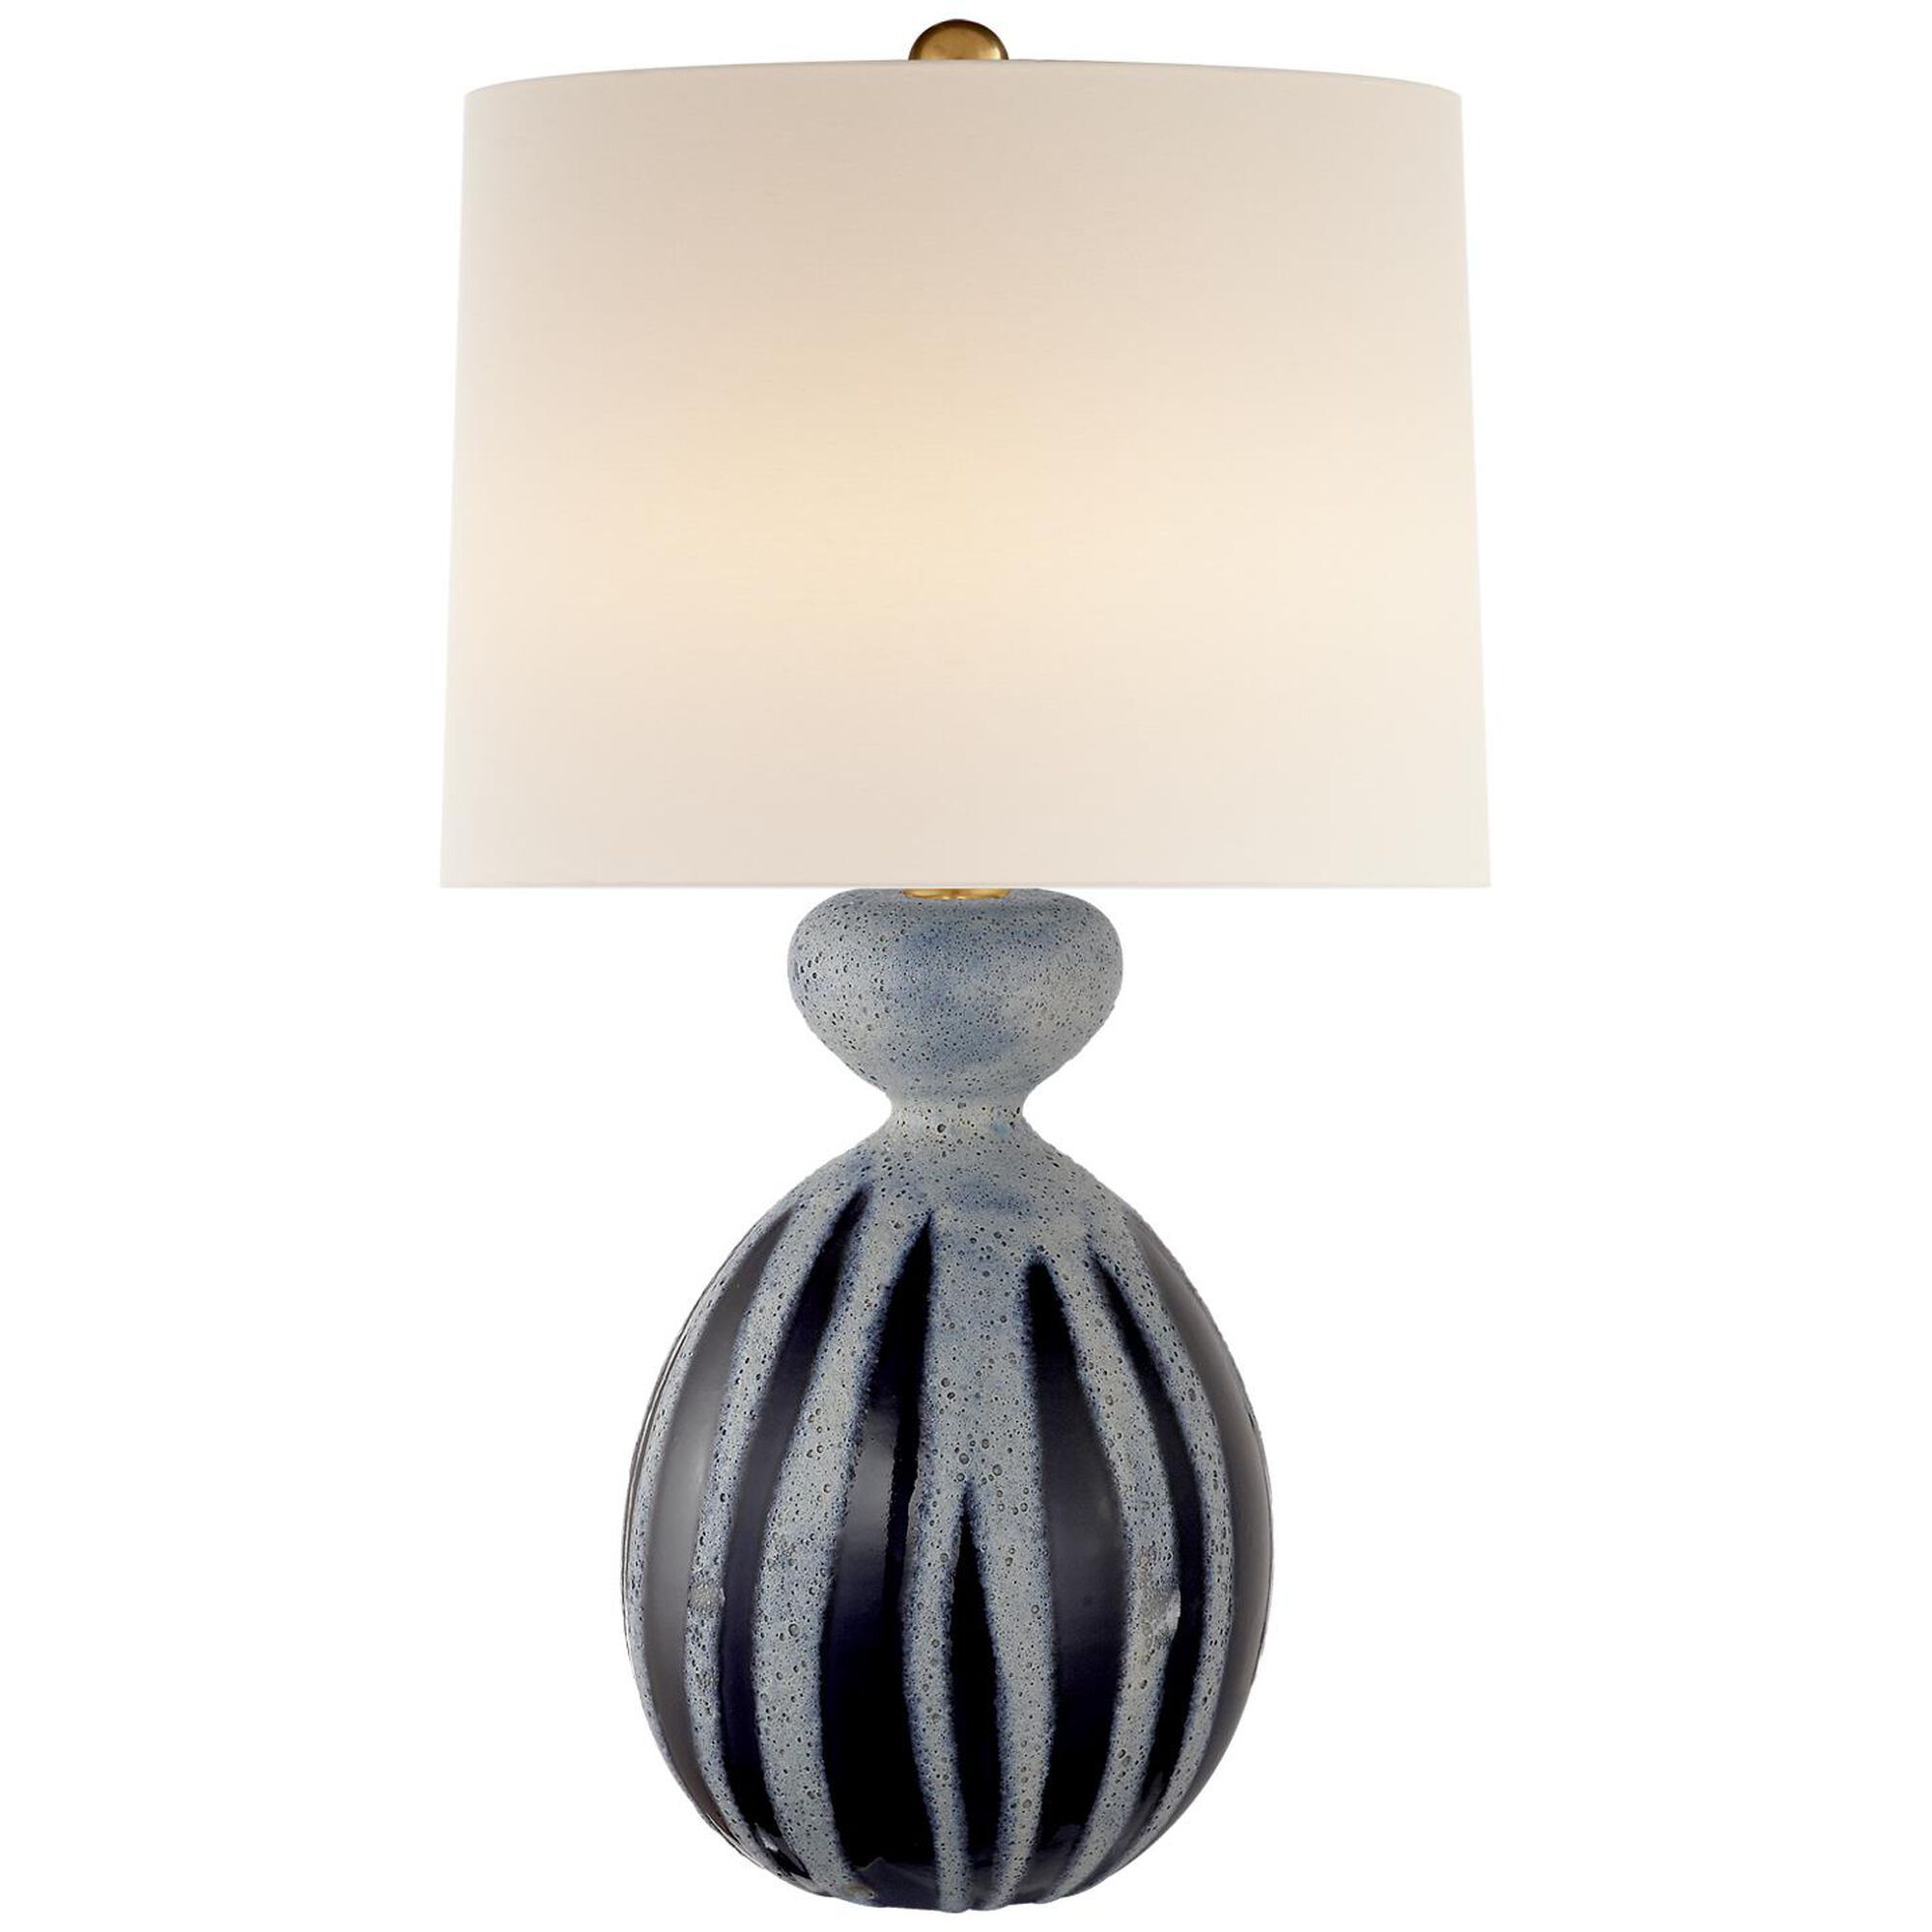 Aerin Gannet 29 Inch Table Lamp by Visual Comfort and Co. | 1800 Lighting